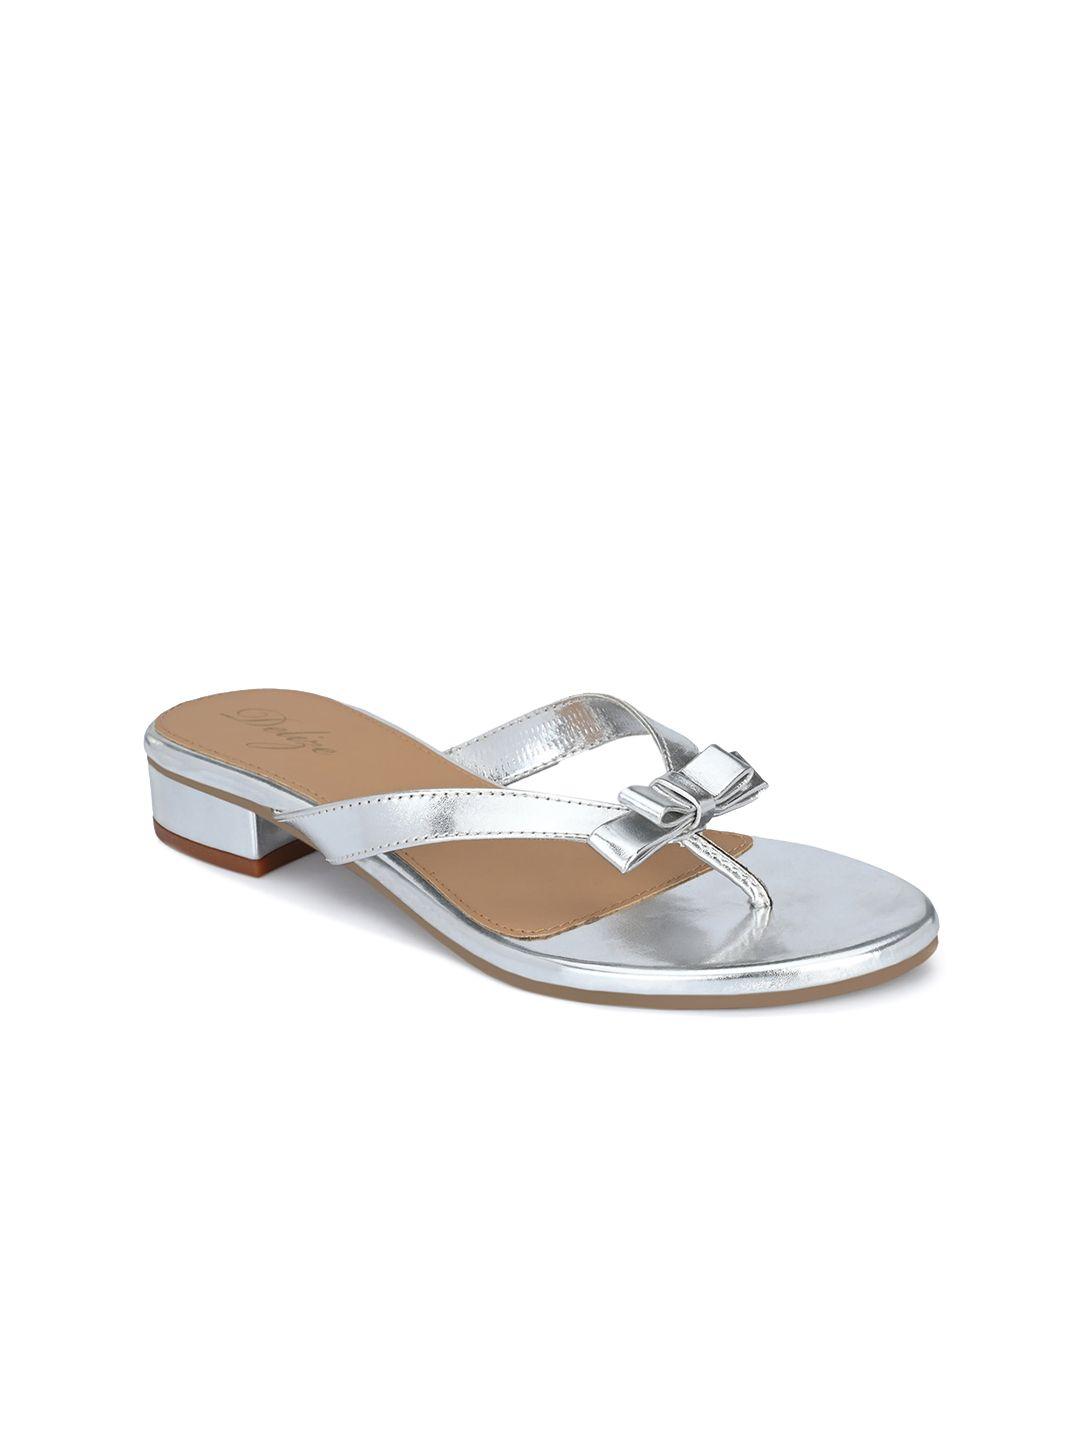 delize women silver-toned t-strap flats with bows